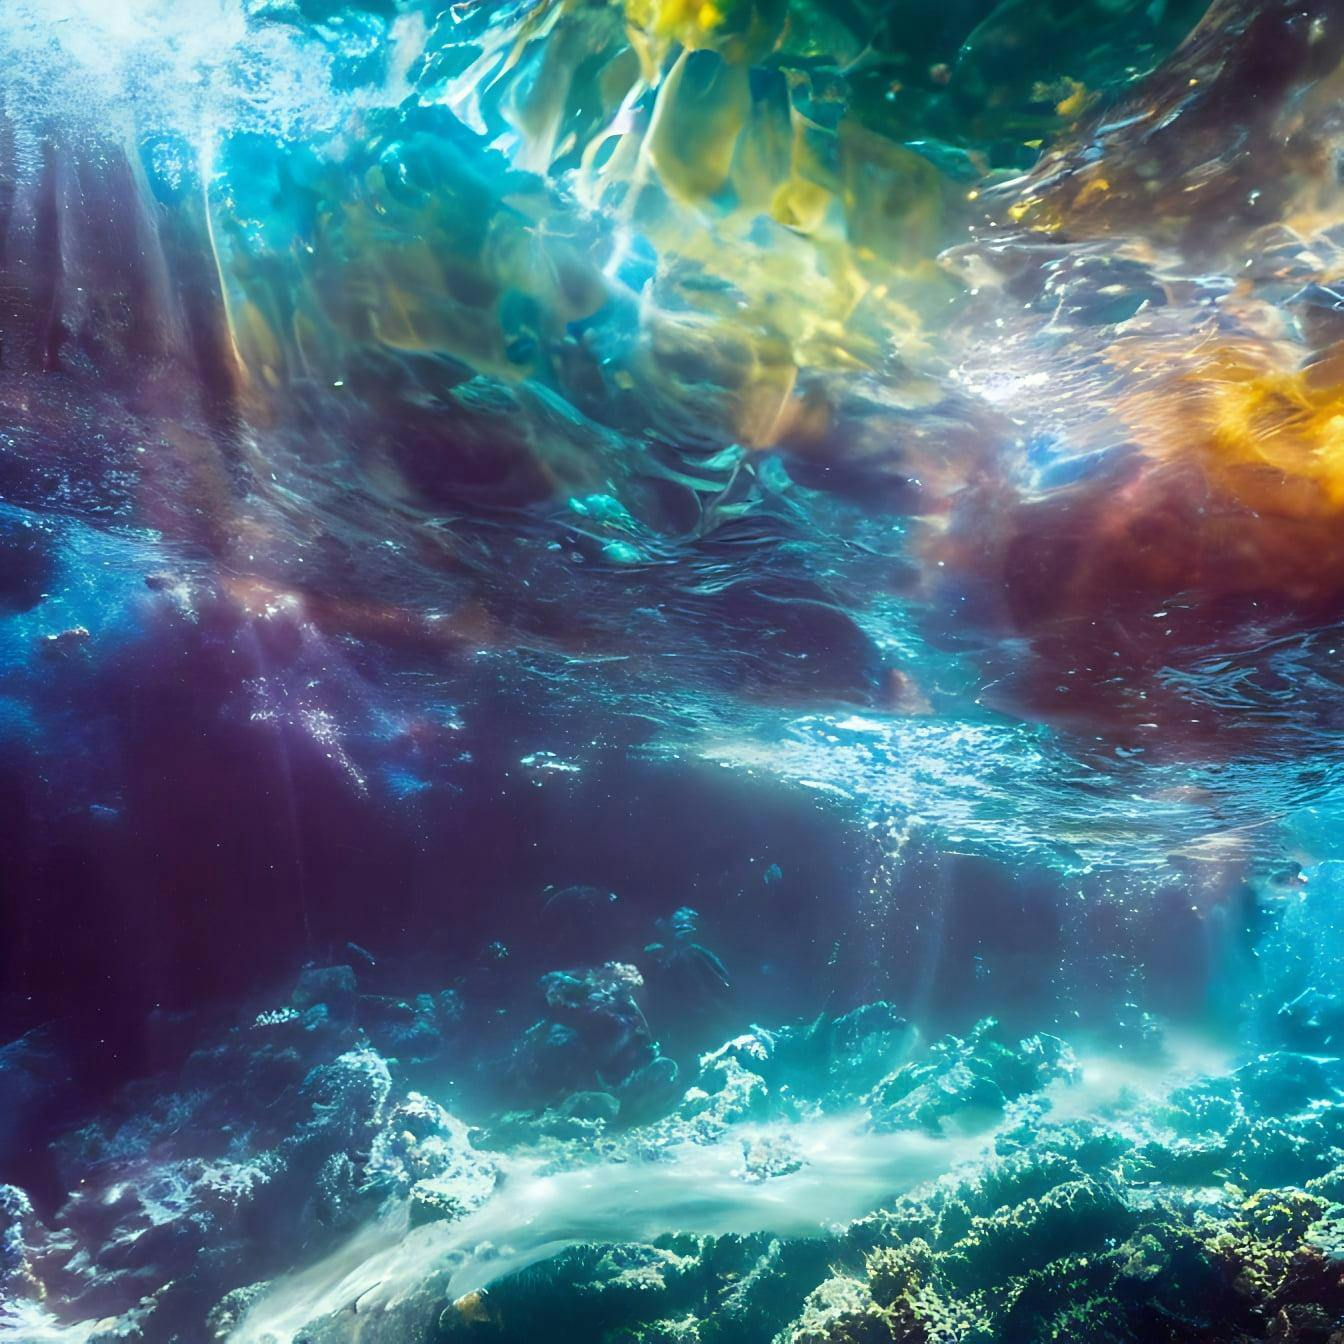 Underwater Flowing Magical Place Under Sea With Visible Translucent Beautiful Waves Trough Which You Can See The Multicoloured Universe And Galaxies